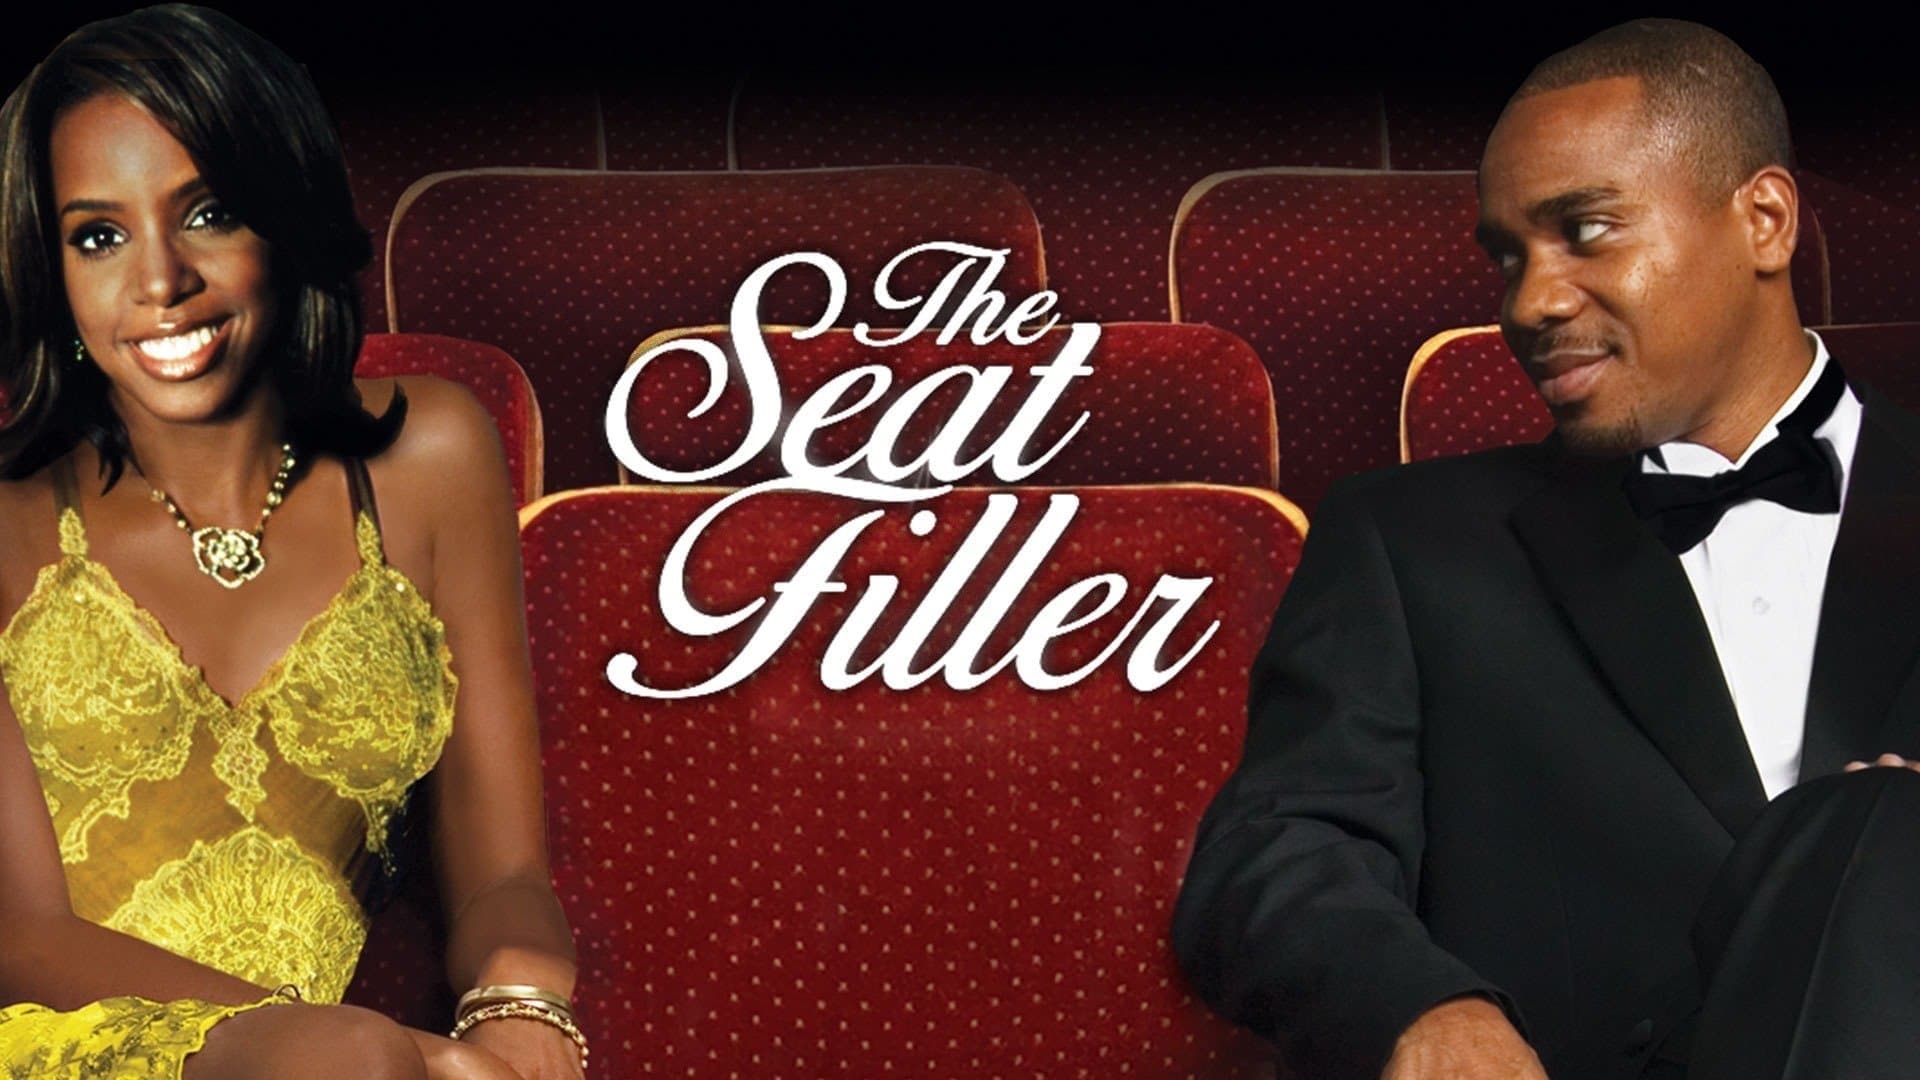 The Seat Filler